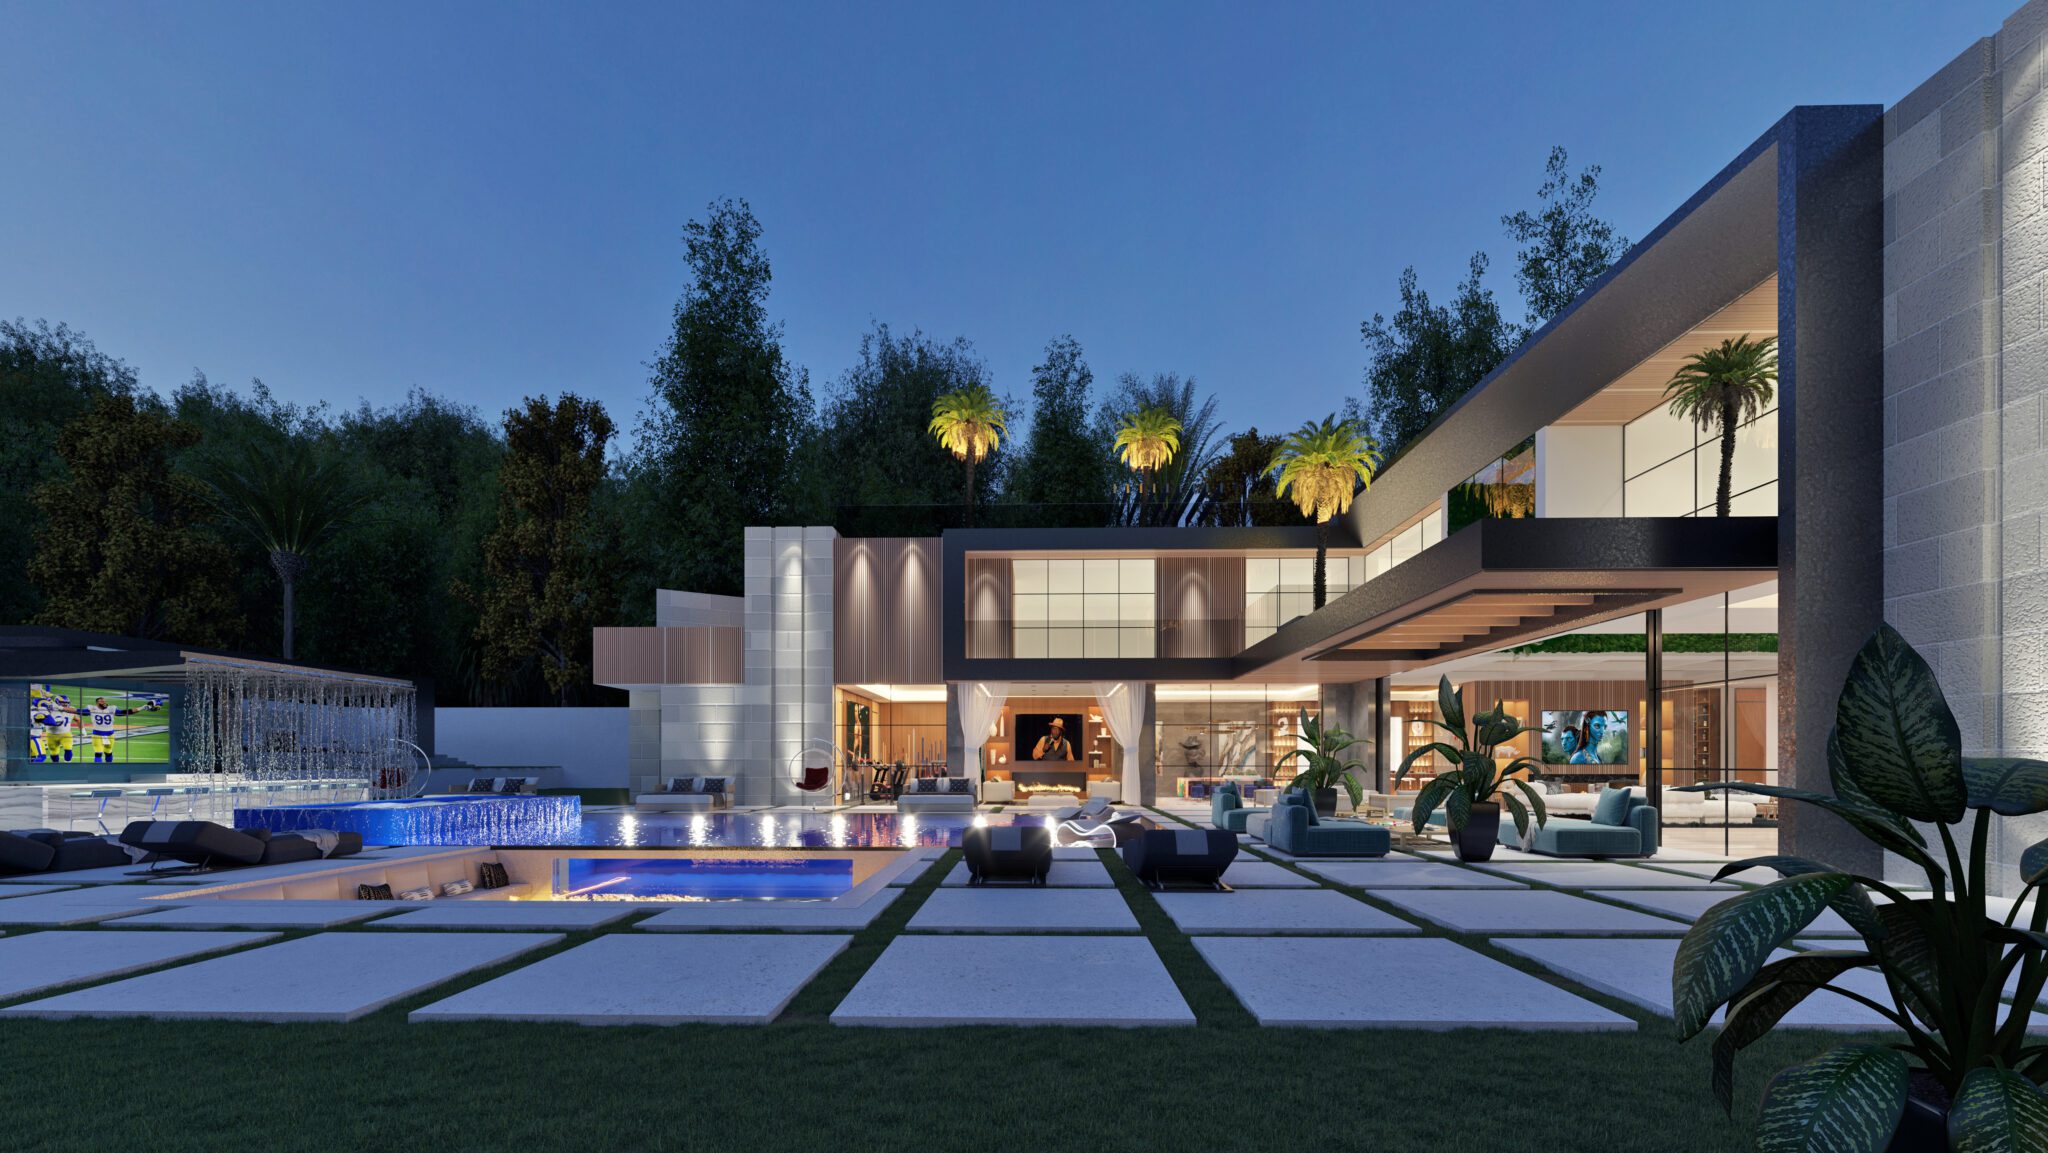 wide view of outdoor patio, pool and home at evening hours